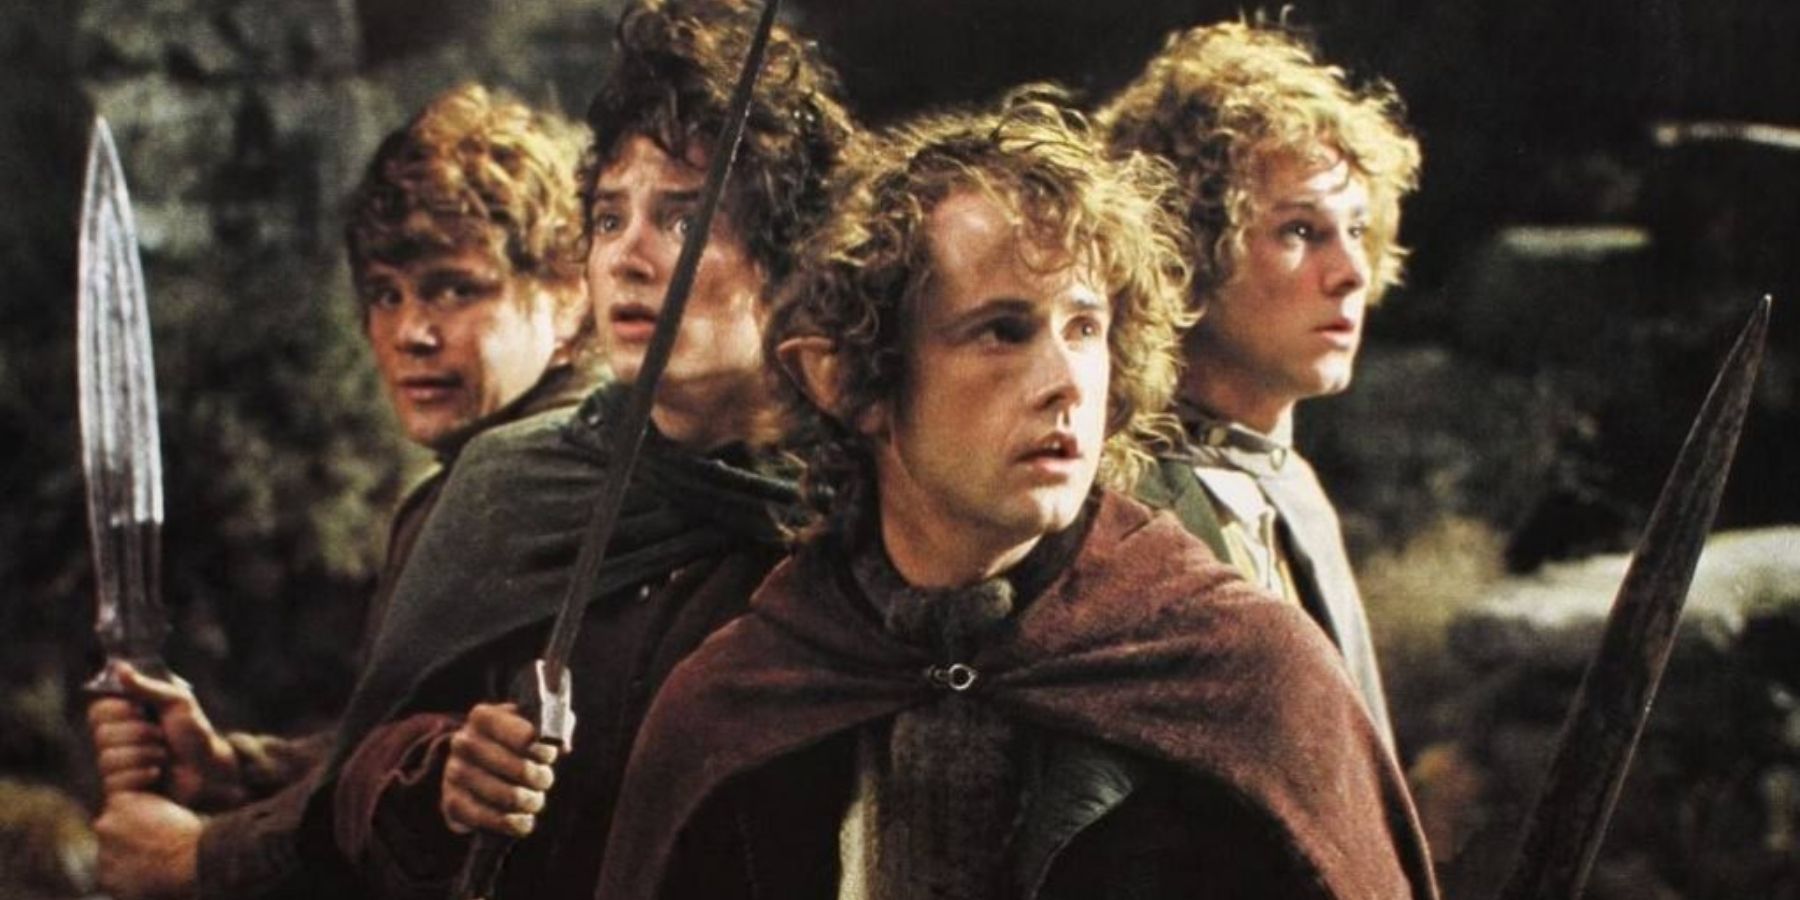 Pippin_Frodo_Sam_Merry_Lord of the Rings